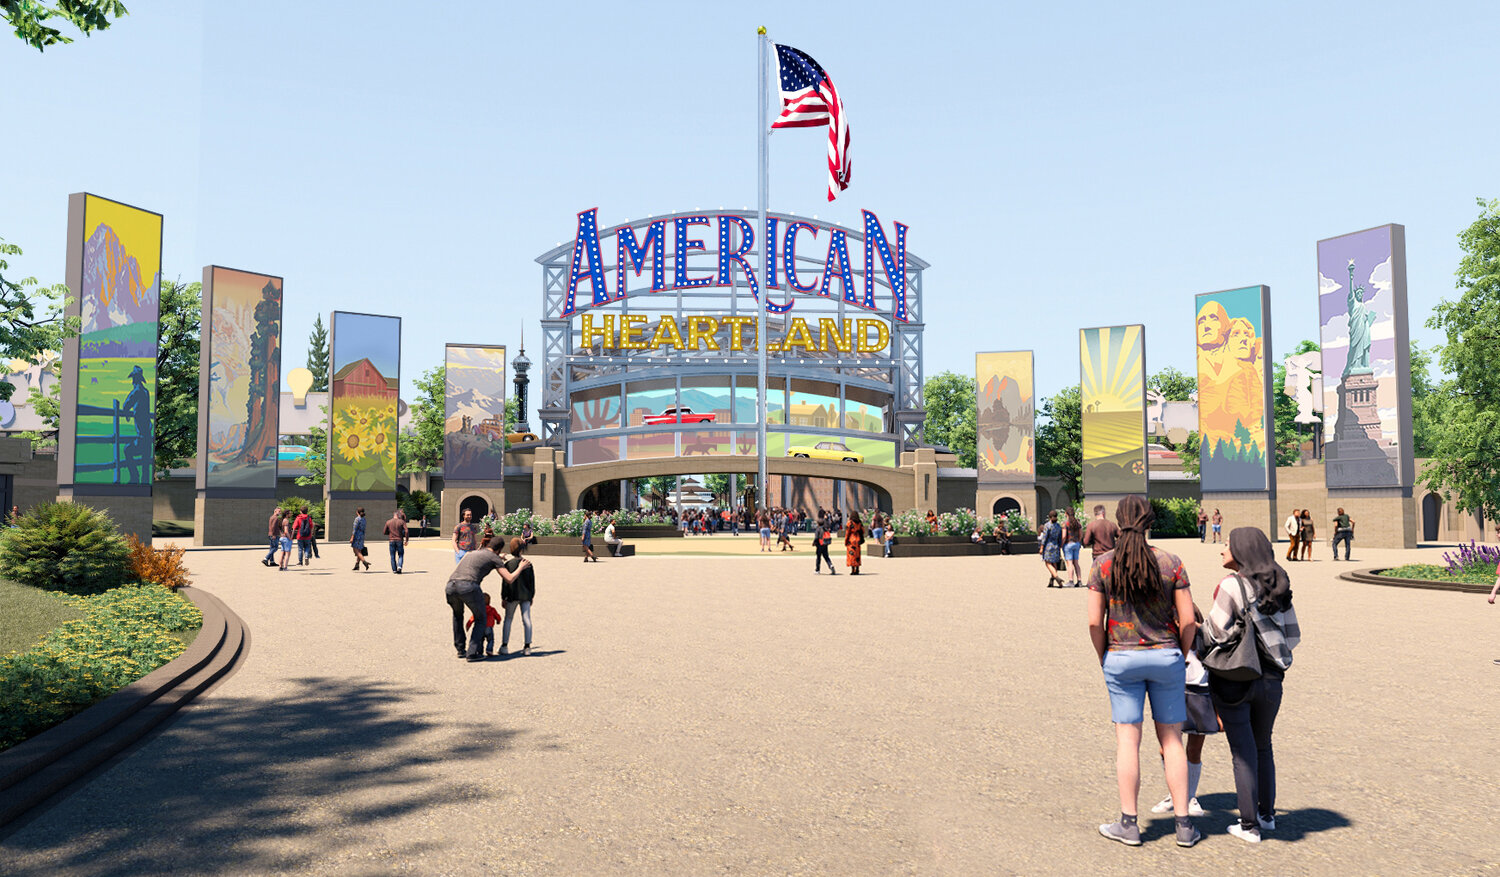 An artist rendering depicts the main park entrance of the American Heartland Theme Park and Resort.